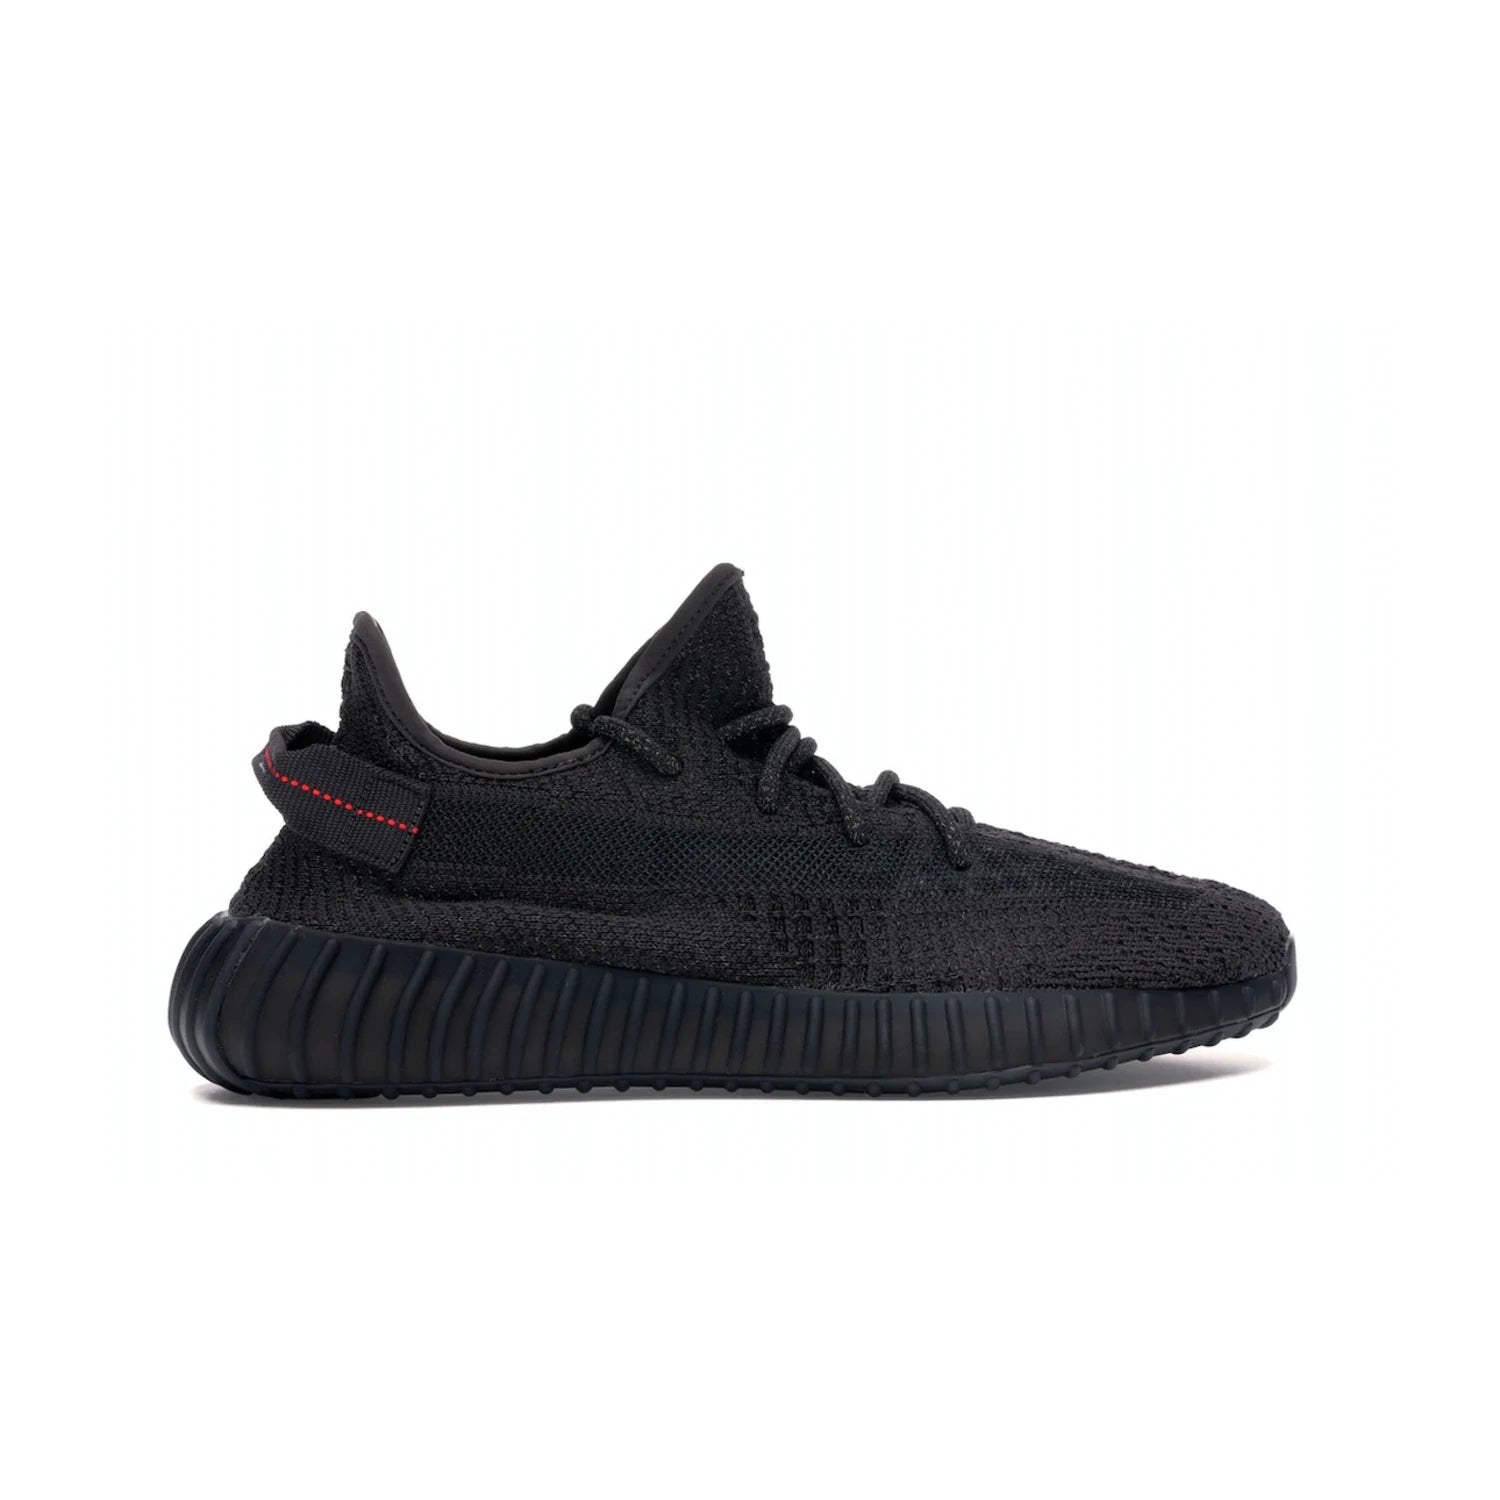 adidas Yeezy Boost 350 V2 Static Black (Reflective) - Image 36 - Only at www.BallersClubKickz.com - Make a statement with the adidas Yeezy Boost 350 V2 Static Black Reflective. All-black upper, reflective accents, midsole, and sole combine for a stylish look. High quality materials. June 2019 release. Add to your collection today.